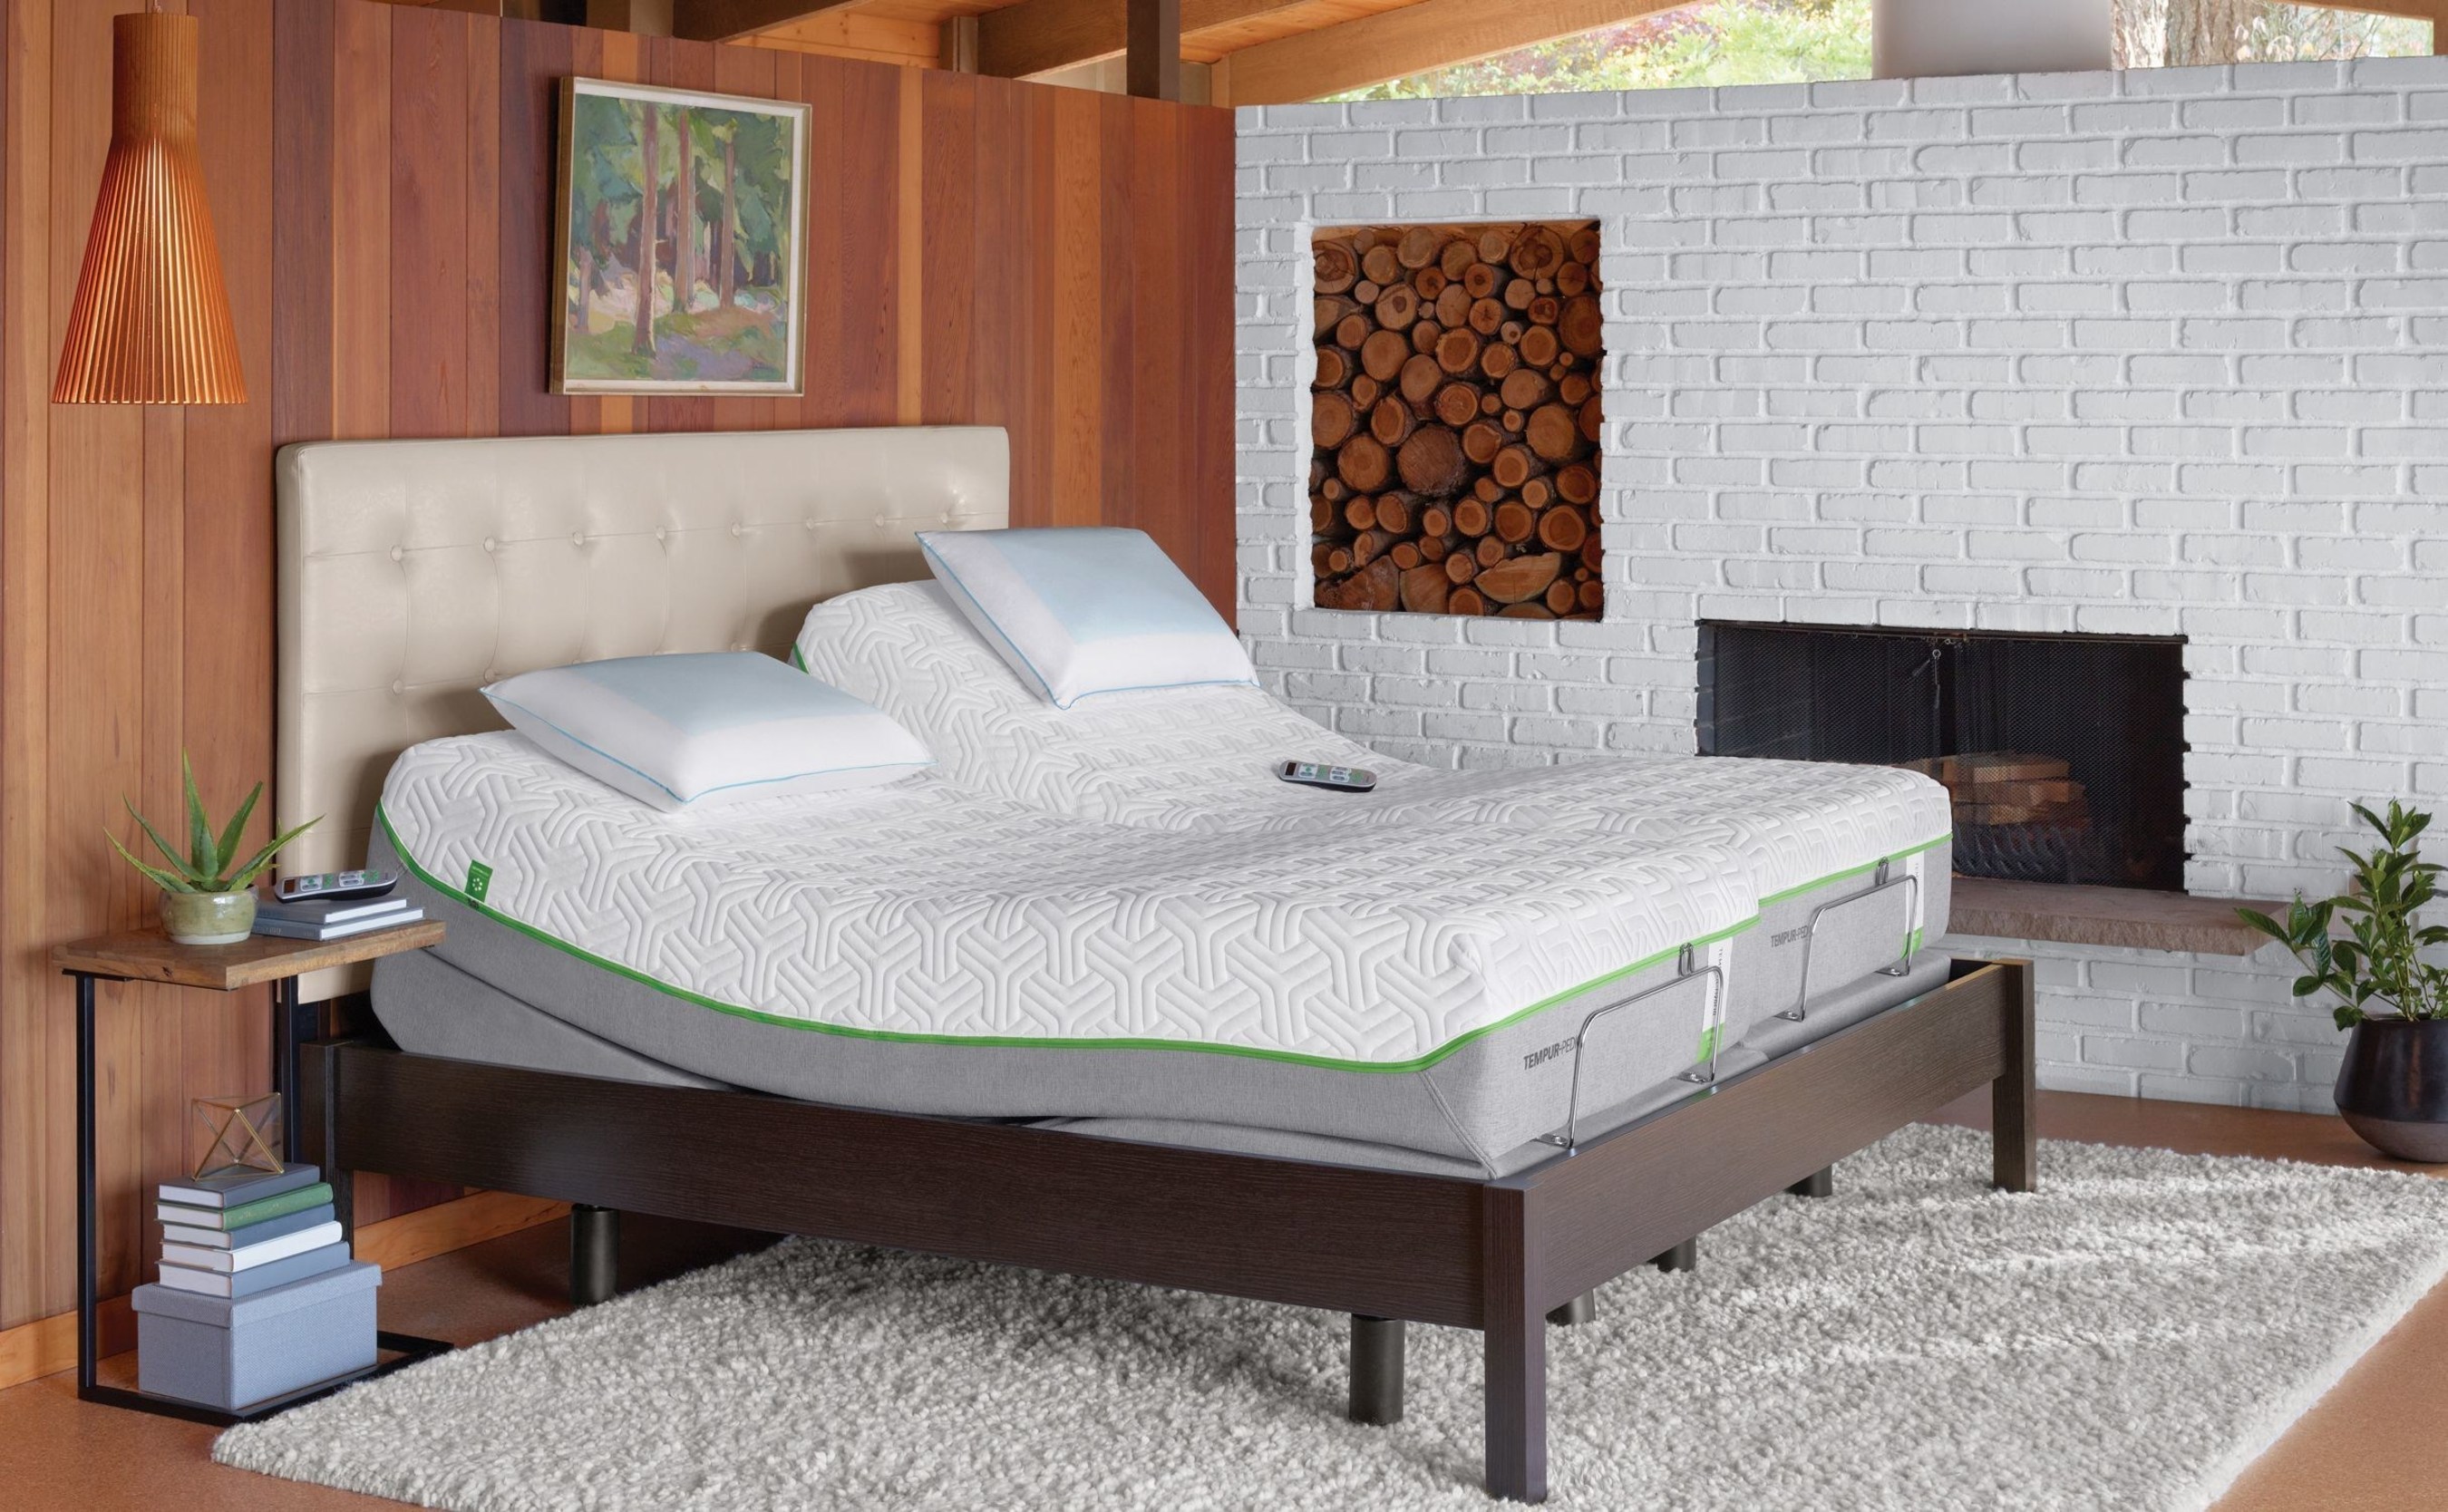 Tempur-Pedic North America, LLC, announced its partnership with HGTV(R) for the third annual HGTV Smart Home, which showcases the latest products in home technology and energy efficiency. This year's HGTV Smart Home features the new TEMPUR-Flex(R) Collection, which delivers all the famous benefits of TEMPUR(R) material - adaptive support, pressure relief and motion dispersal - in a whole new feel that research shows appeals to consumers seeking better sleep. Additionally featured is the TEMPUR-Ergo...